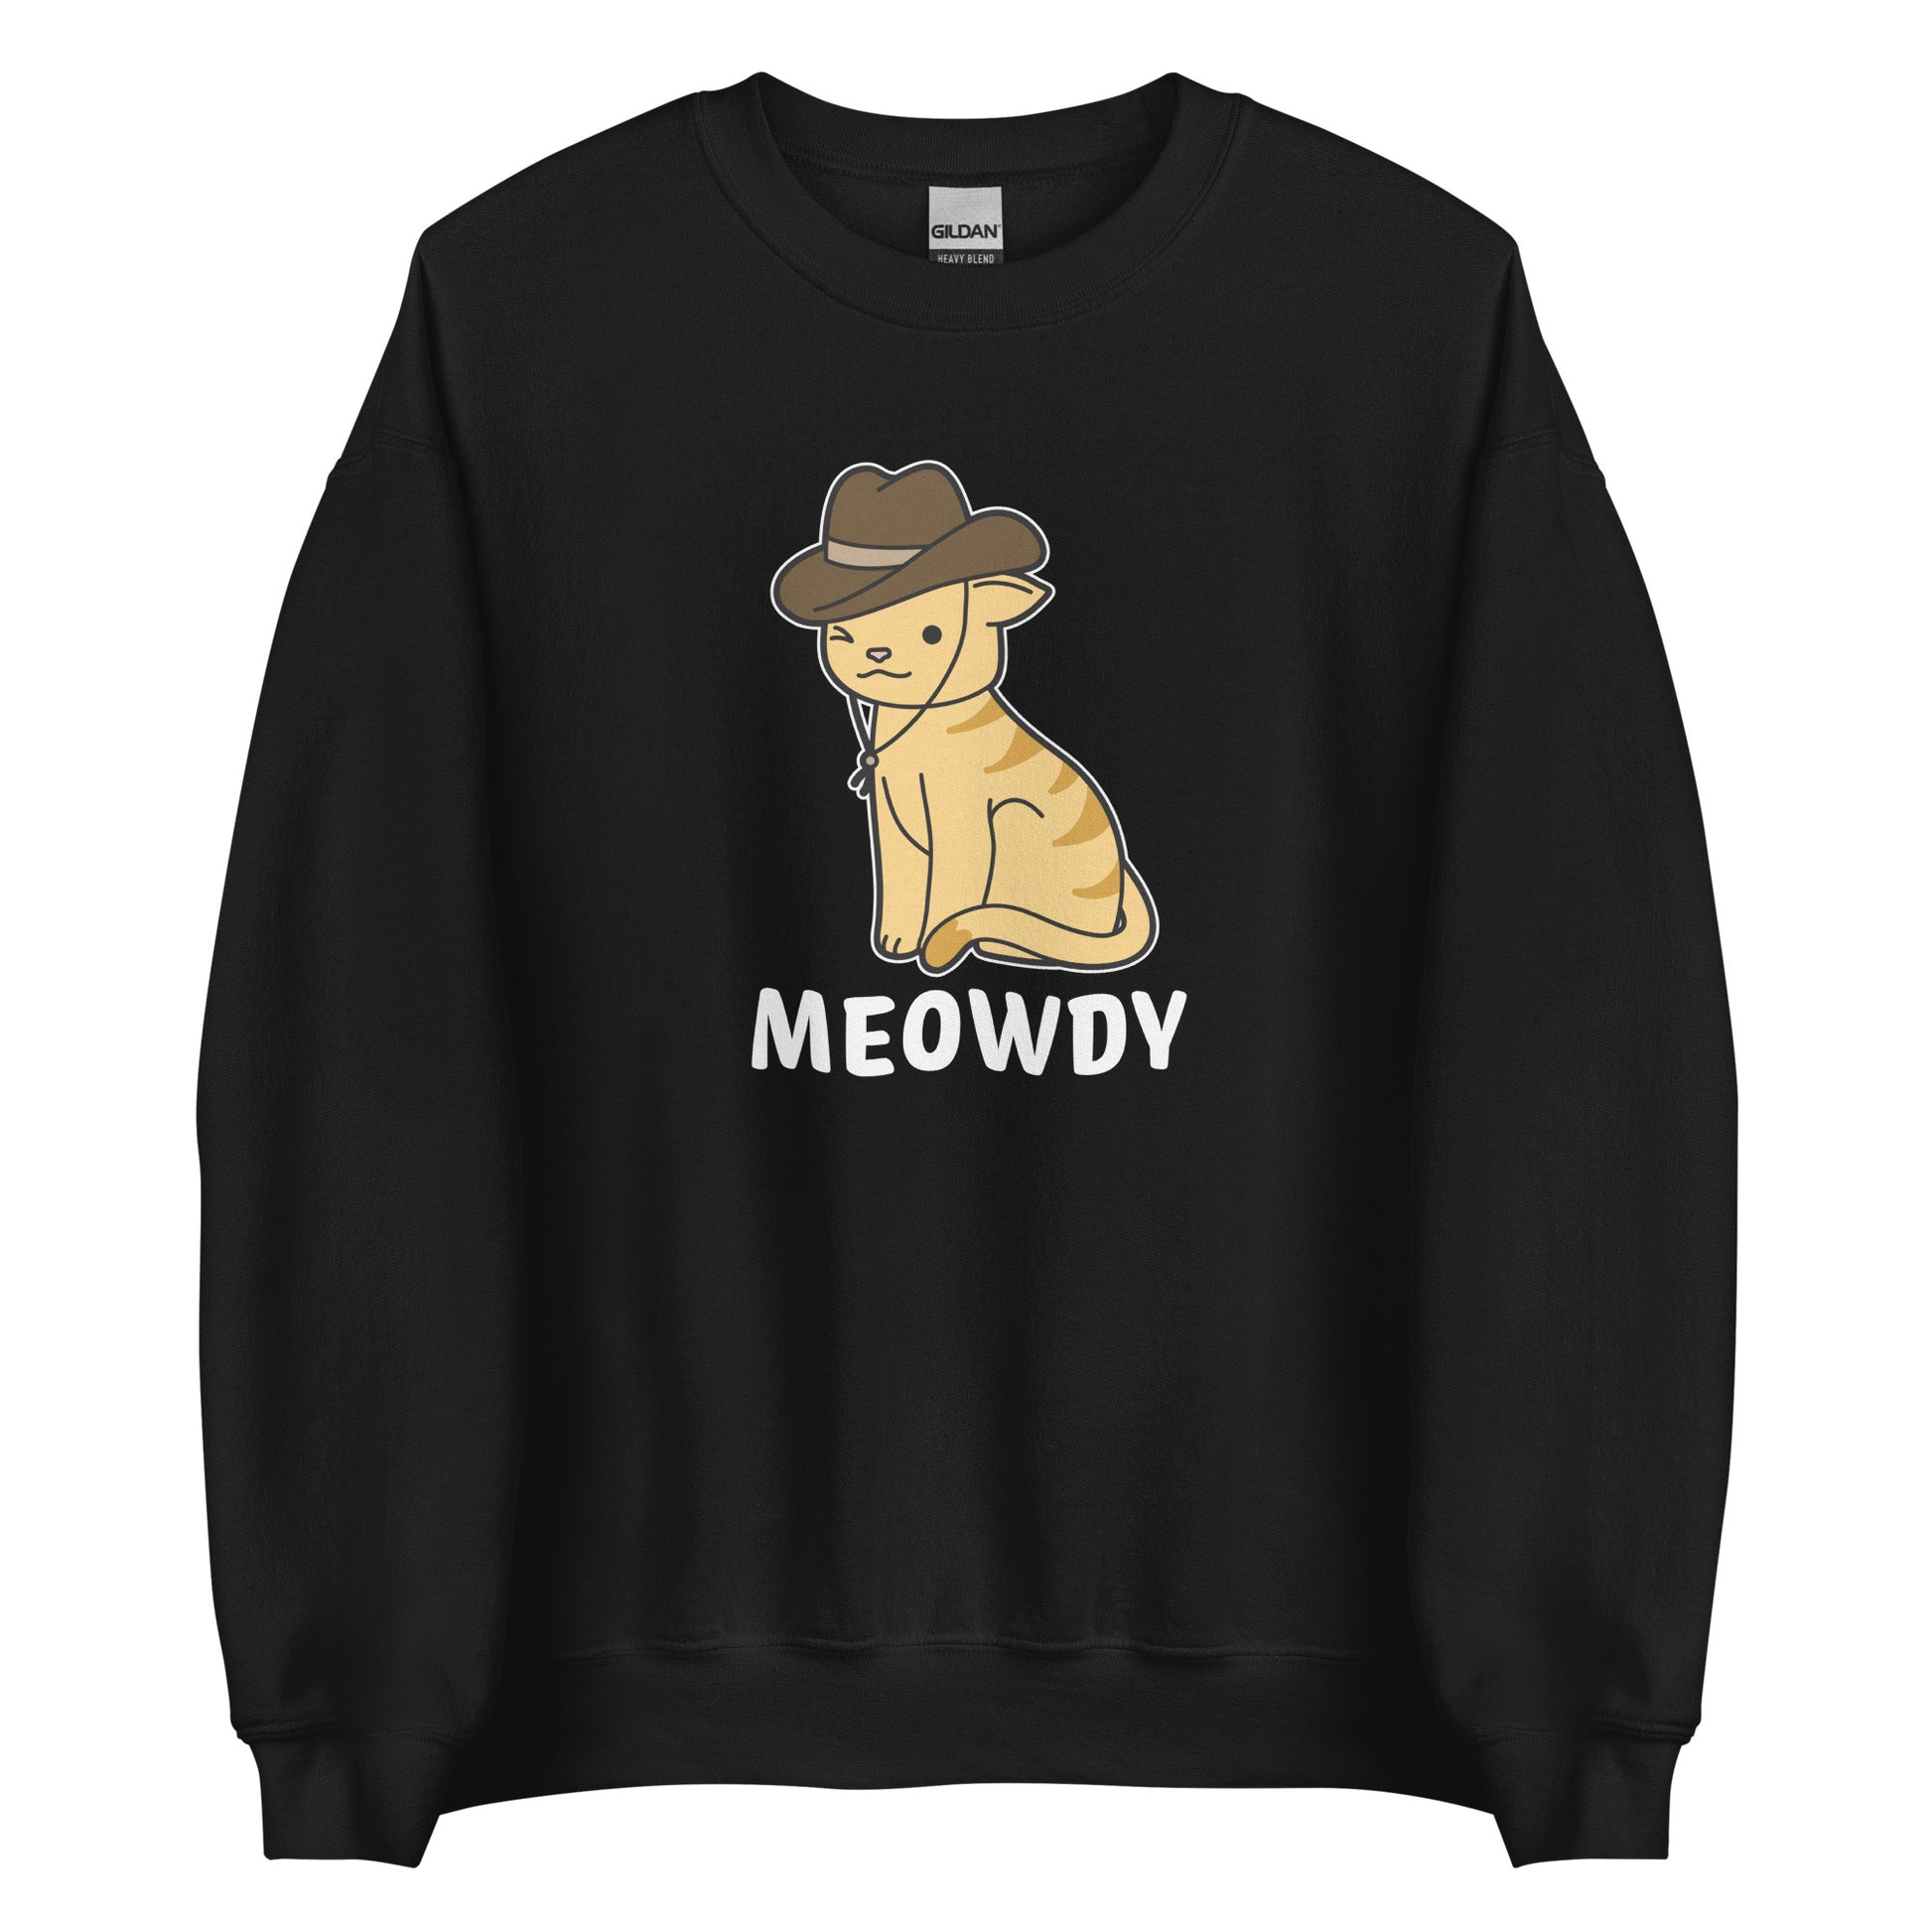 A black crewneck sweatshirt featuring an illsutration of an orange striped cat. The cat is wearing a cowboy hat and winking. Text beneath him reads "Meowdy".